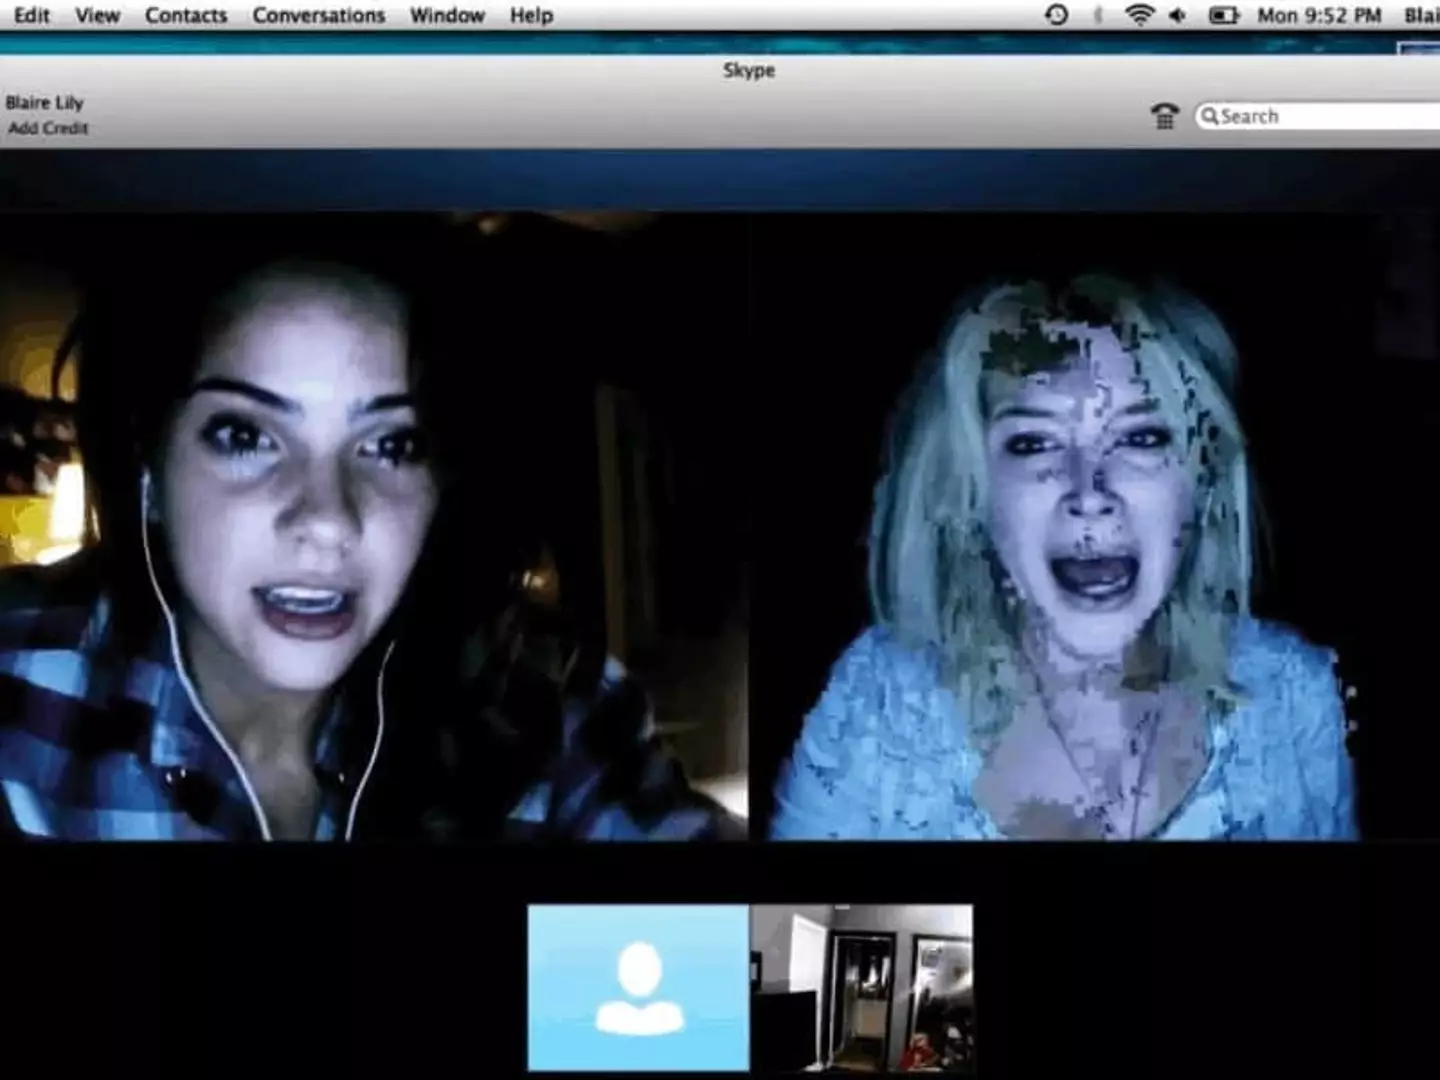 Unfriended is a found footage horror film.